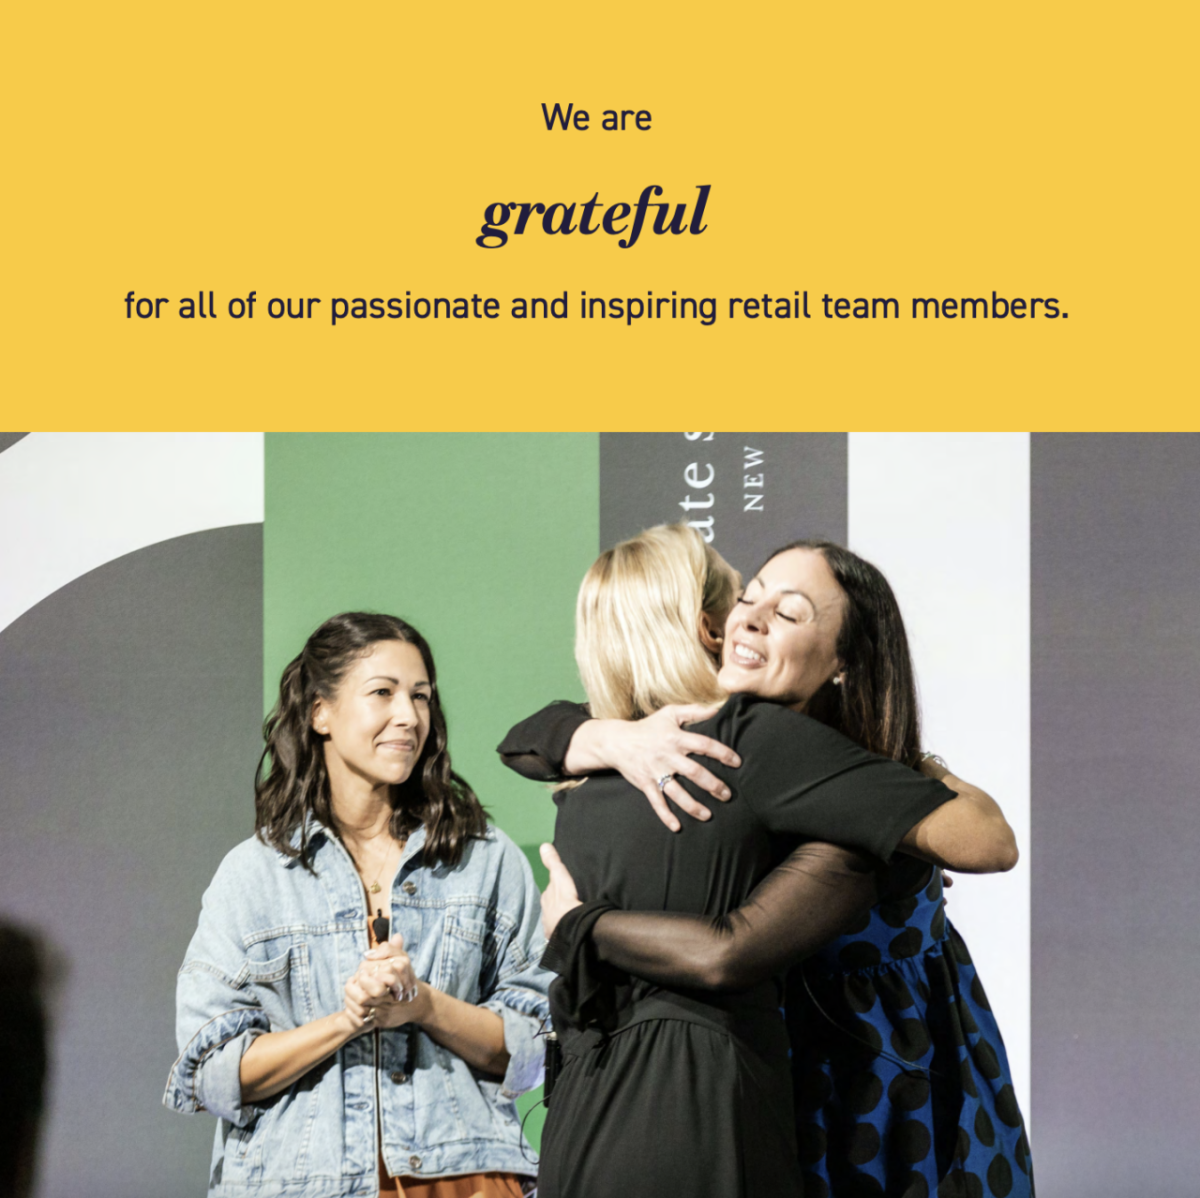 "We are grateful for all of our passionate and inspiring retail team members."